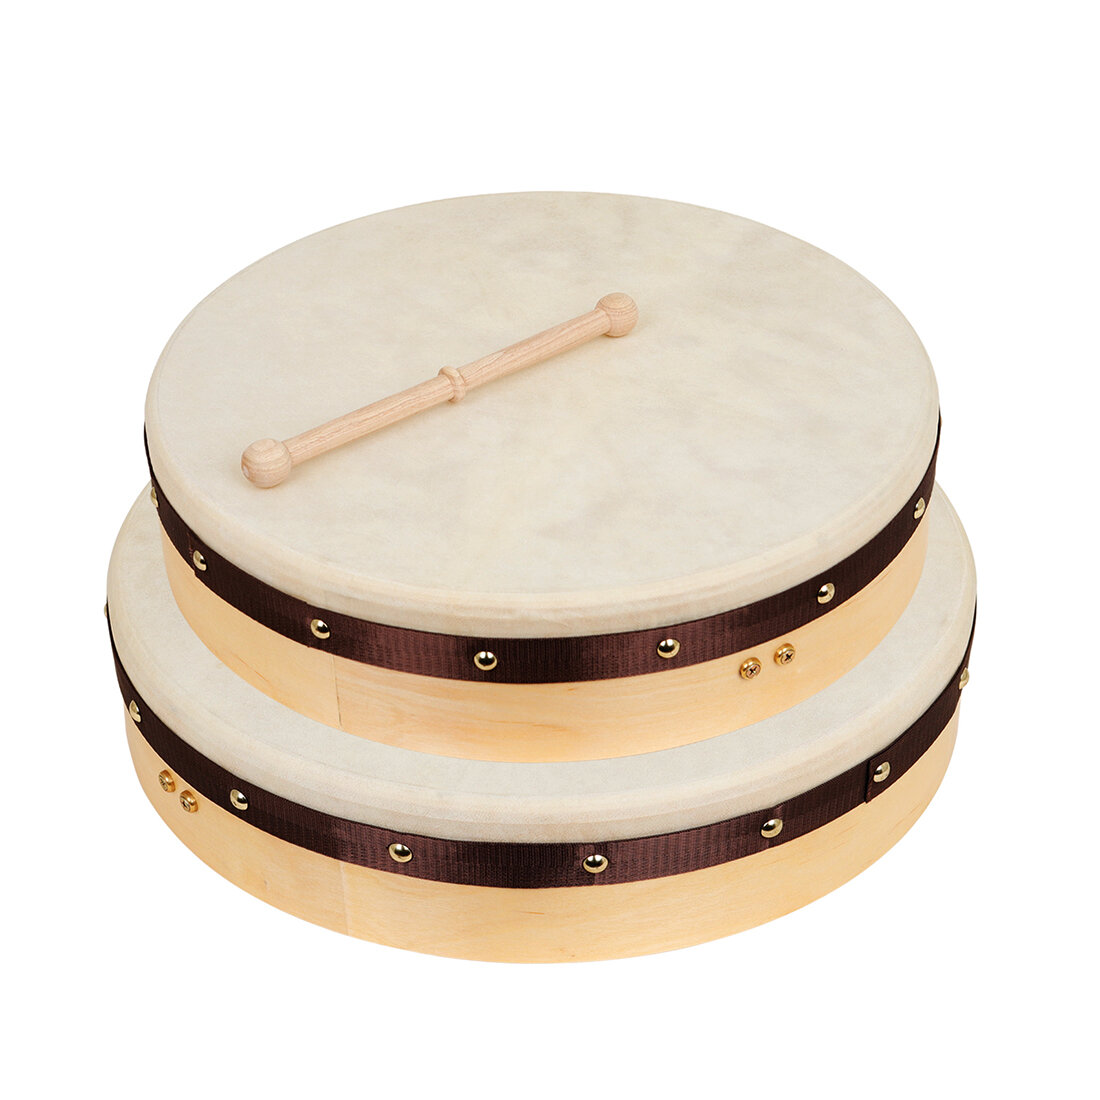 16" 18" IRIN Professional Wooden Hand Drum Percussion Instrument Sheepskin Tambourine Kids Educational Toys With Drumsticks